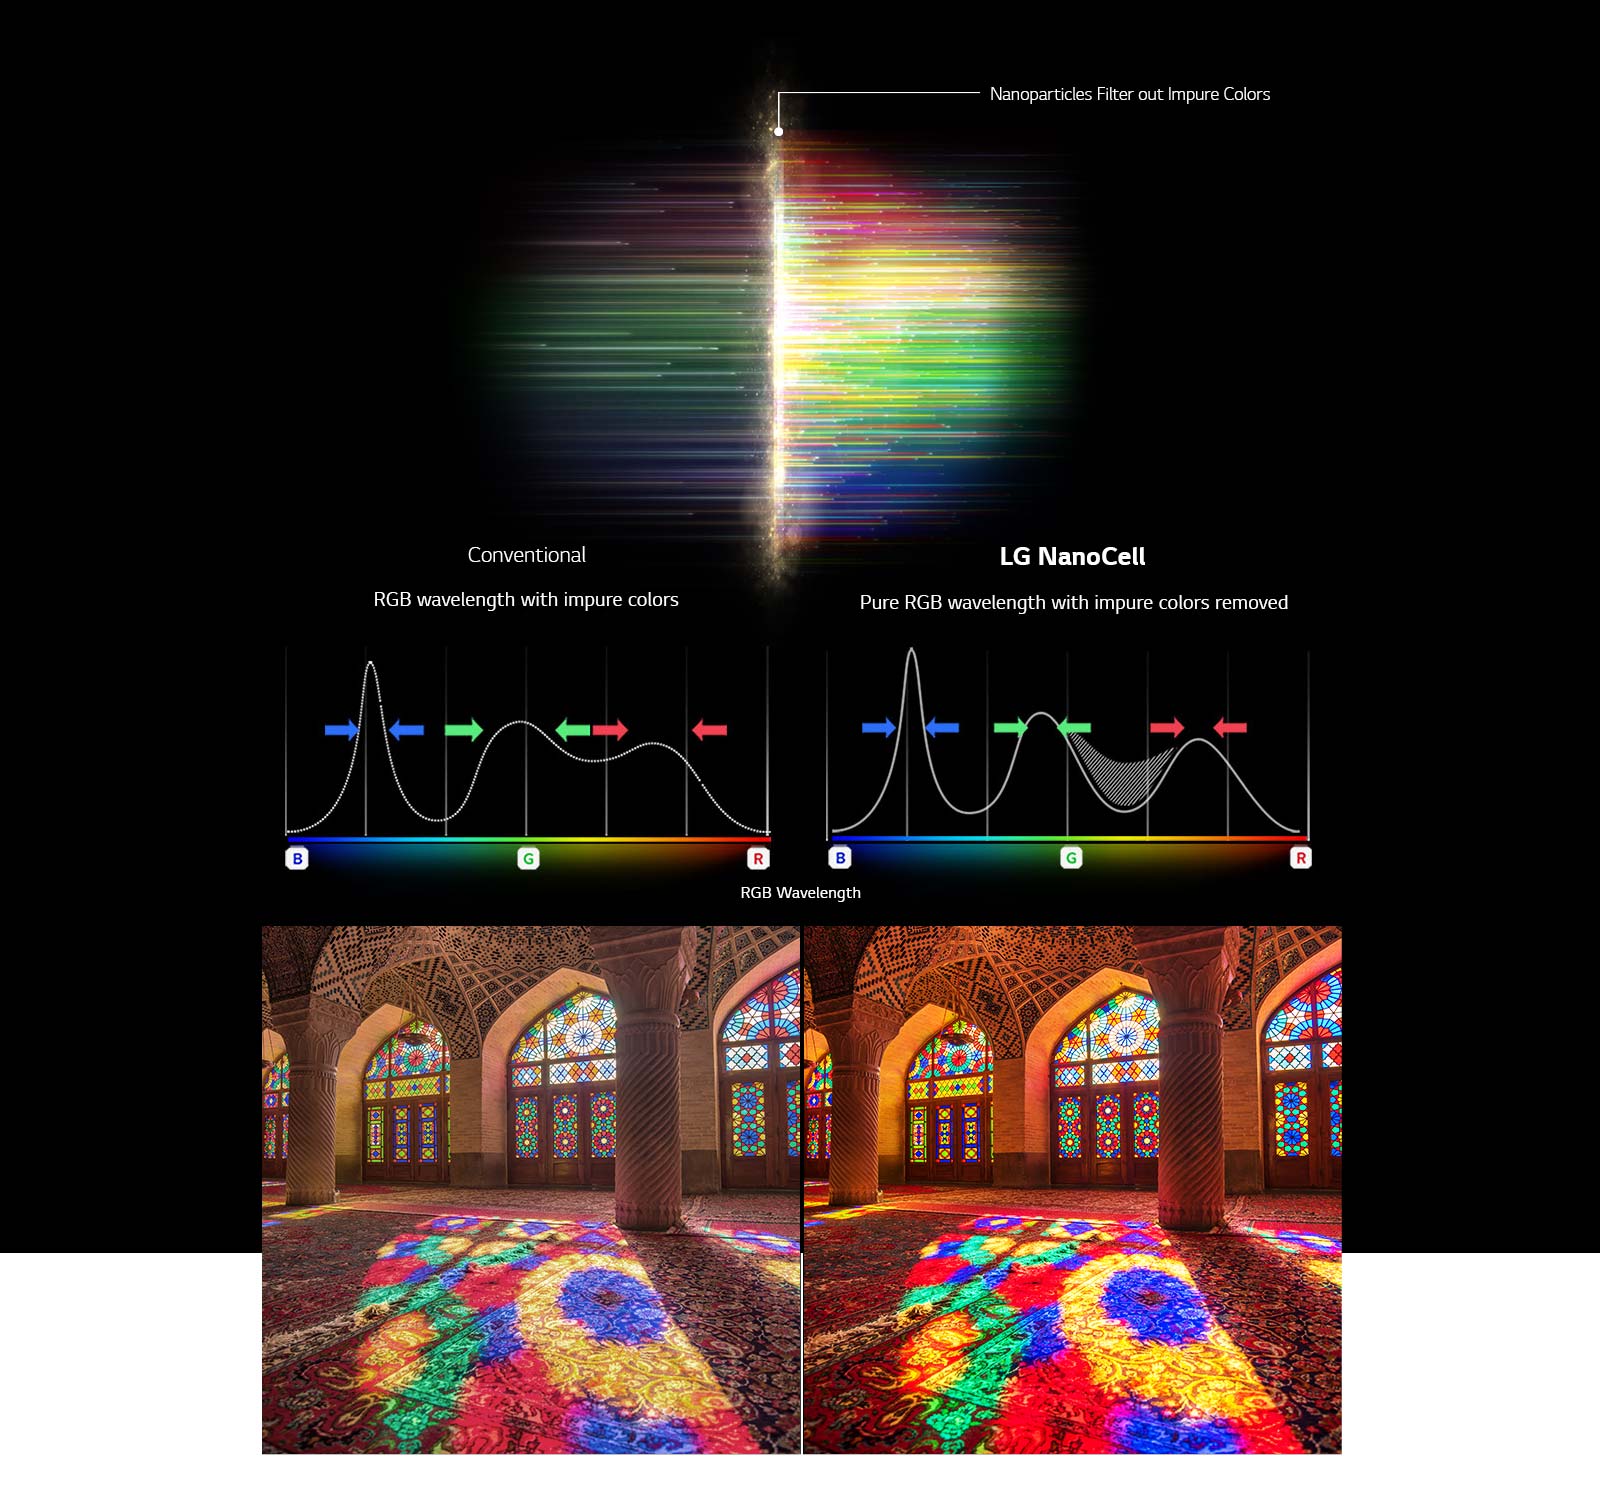 The RGB spectrum graph that showing filter out dull colors and images comparing Color Purity between Conventional and NanoCell Tech